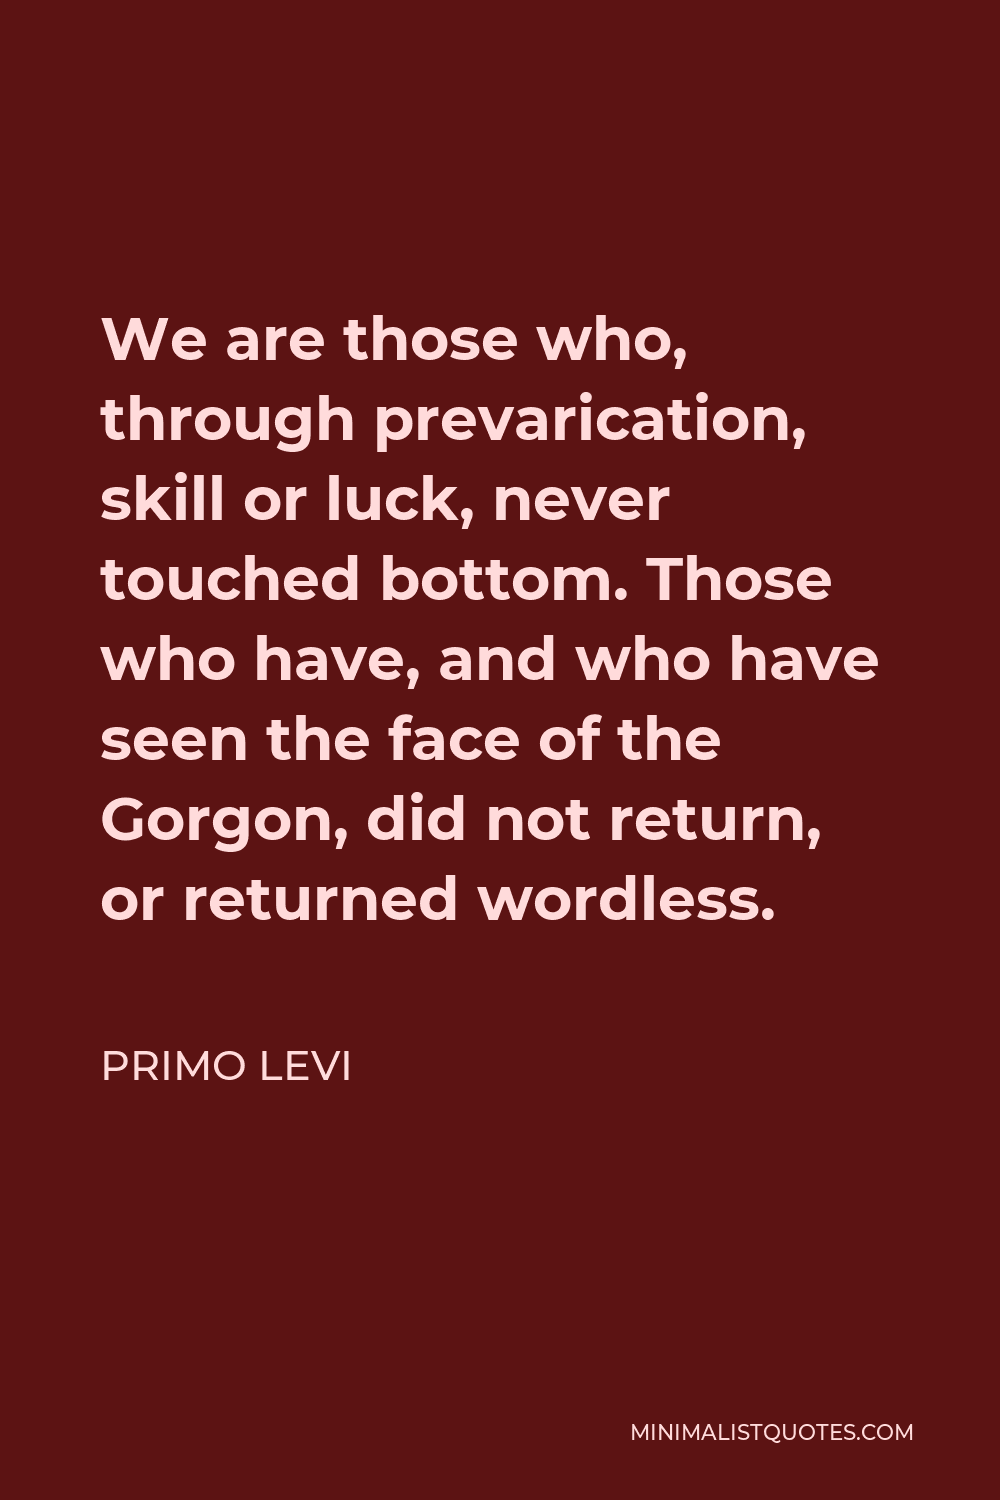 Primo Levi Quote - We are those who, through prevarication, skill or luck, never touched bottom. Those who have, and who have seen the face of the Gorgon, did not return, or returned wordless.